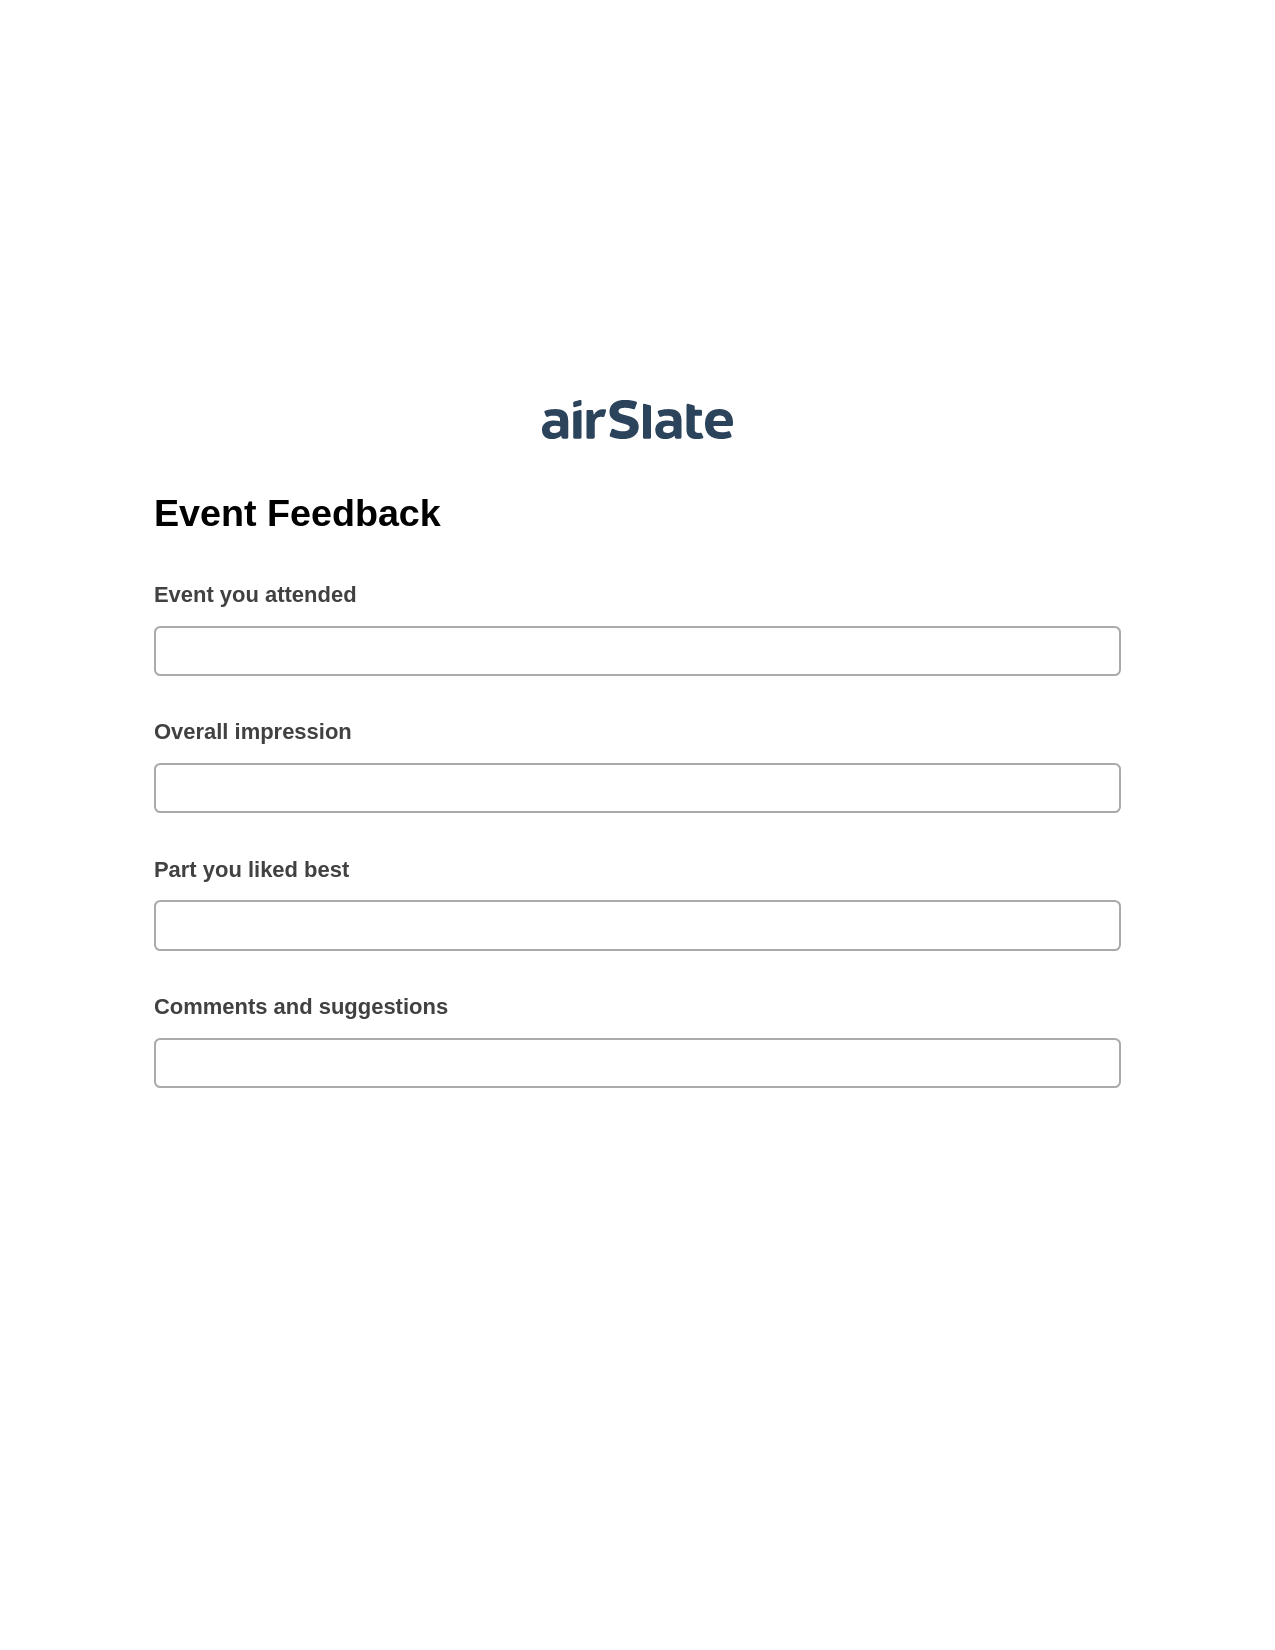 Event Feedback Pre-fill from another Slate Bot, Update NetSuite Records Bot, Box Bot